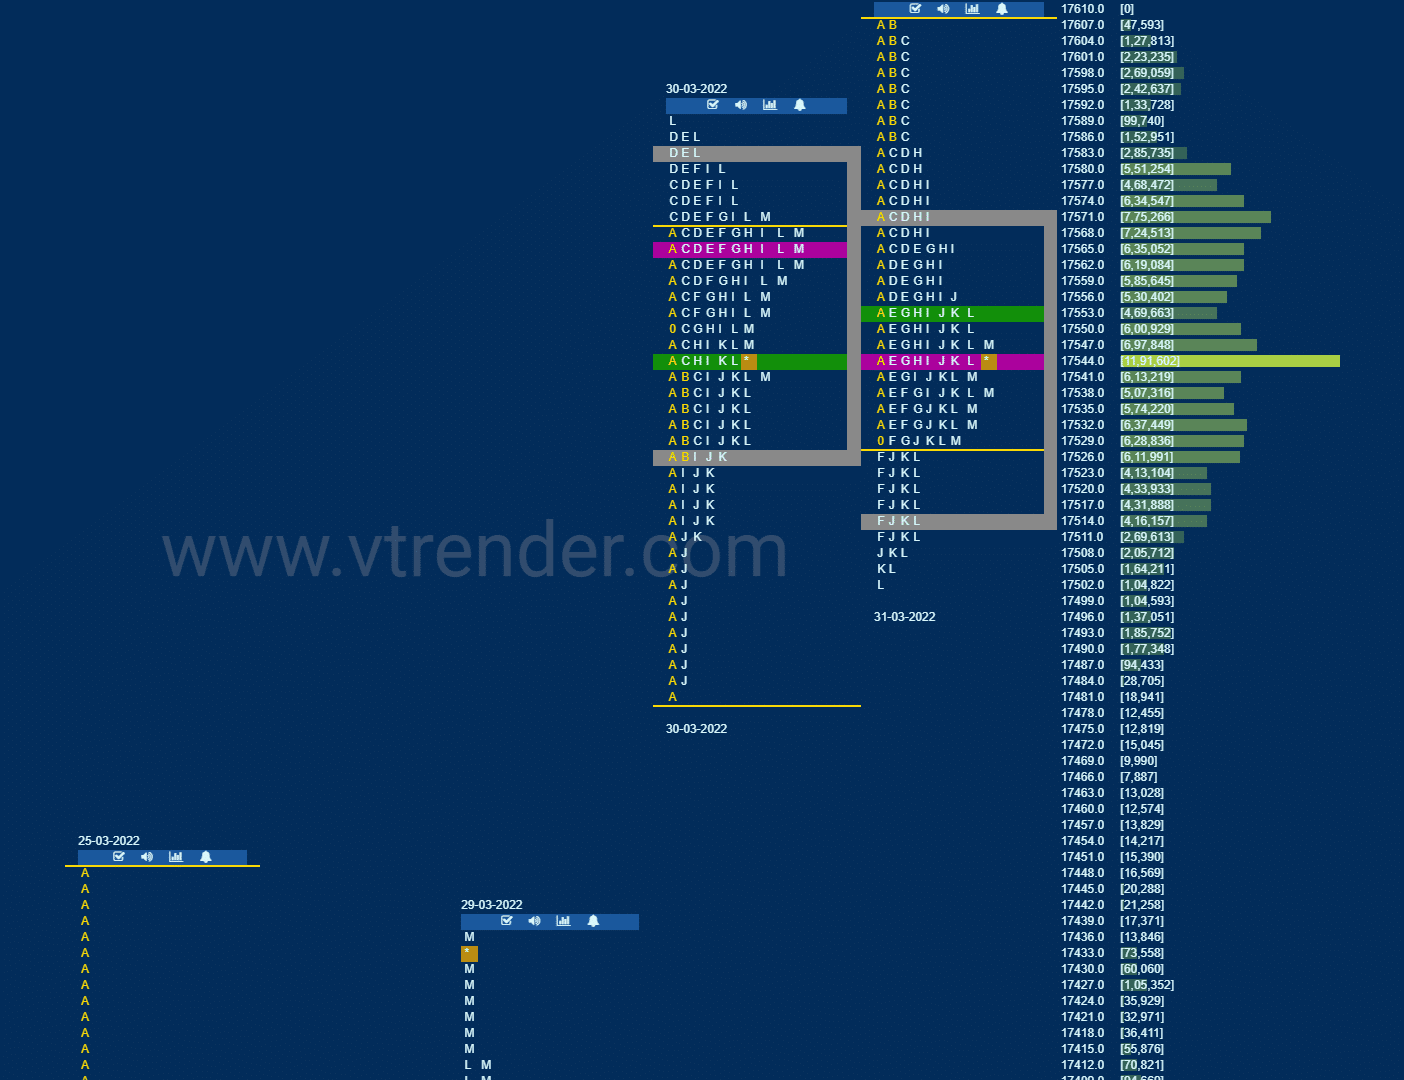 Nf 21 Market Profile Analysis Dated 31St March 2022 Banknifty Futures, Charts, Day Trading, Intraday Trading, Intraday Trading Strategies, Market Profile, Market Profile Trading Strategies, Nifty Futures, Order Flow Analysis, Support And Resistance, Technical Analysis, Trading Strategies, Volume Profile Trading